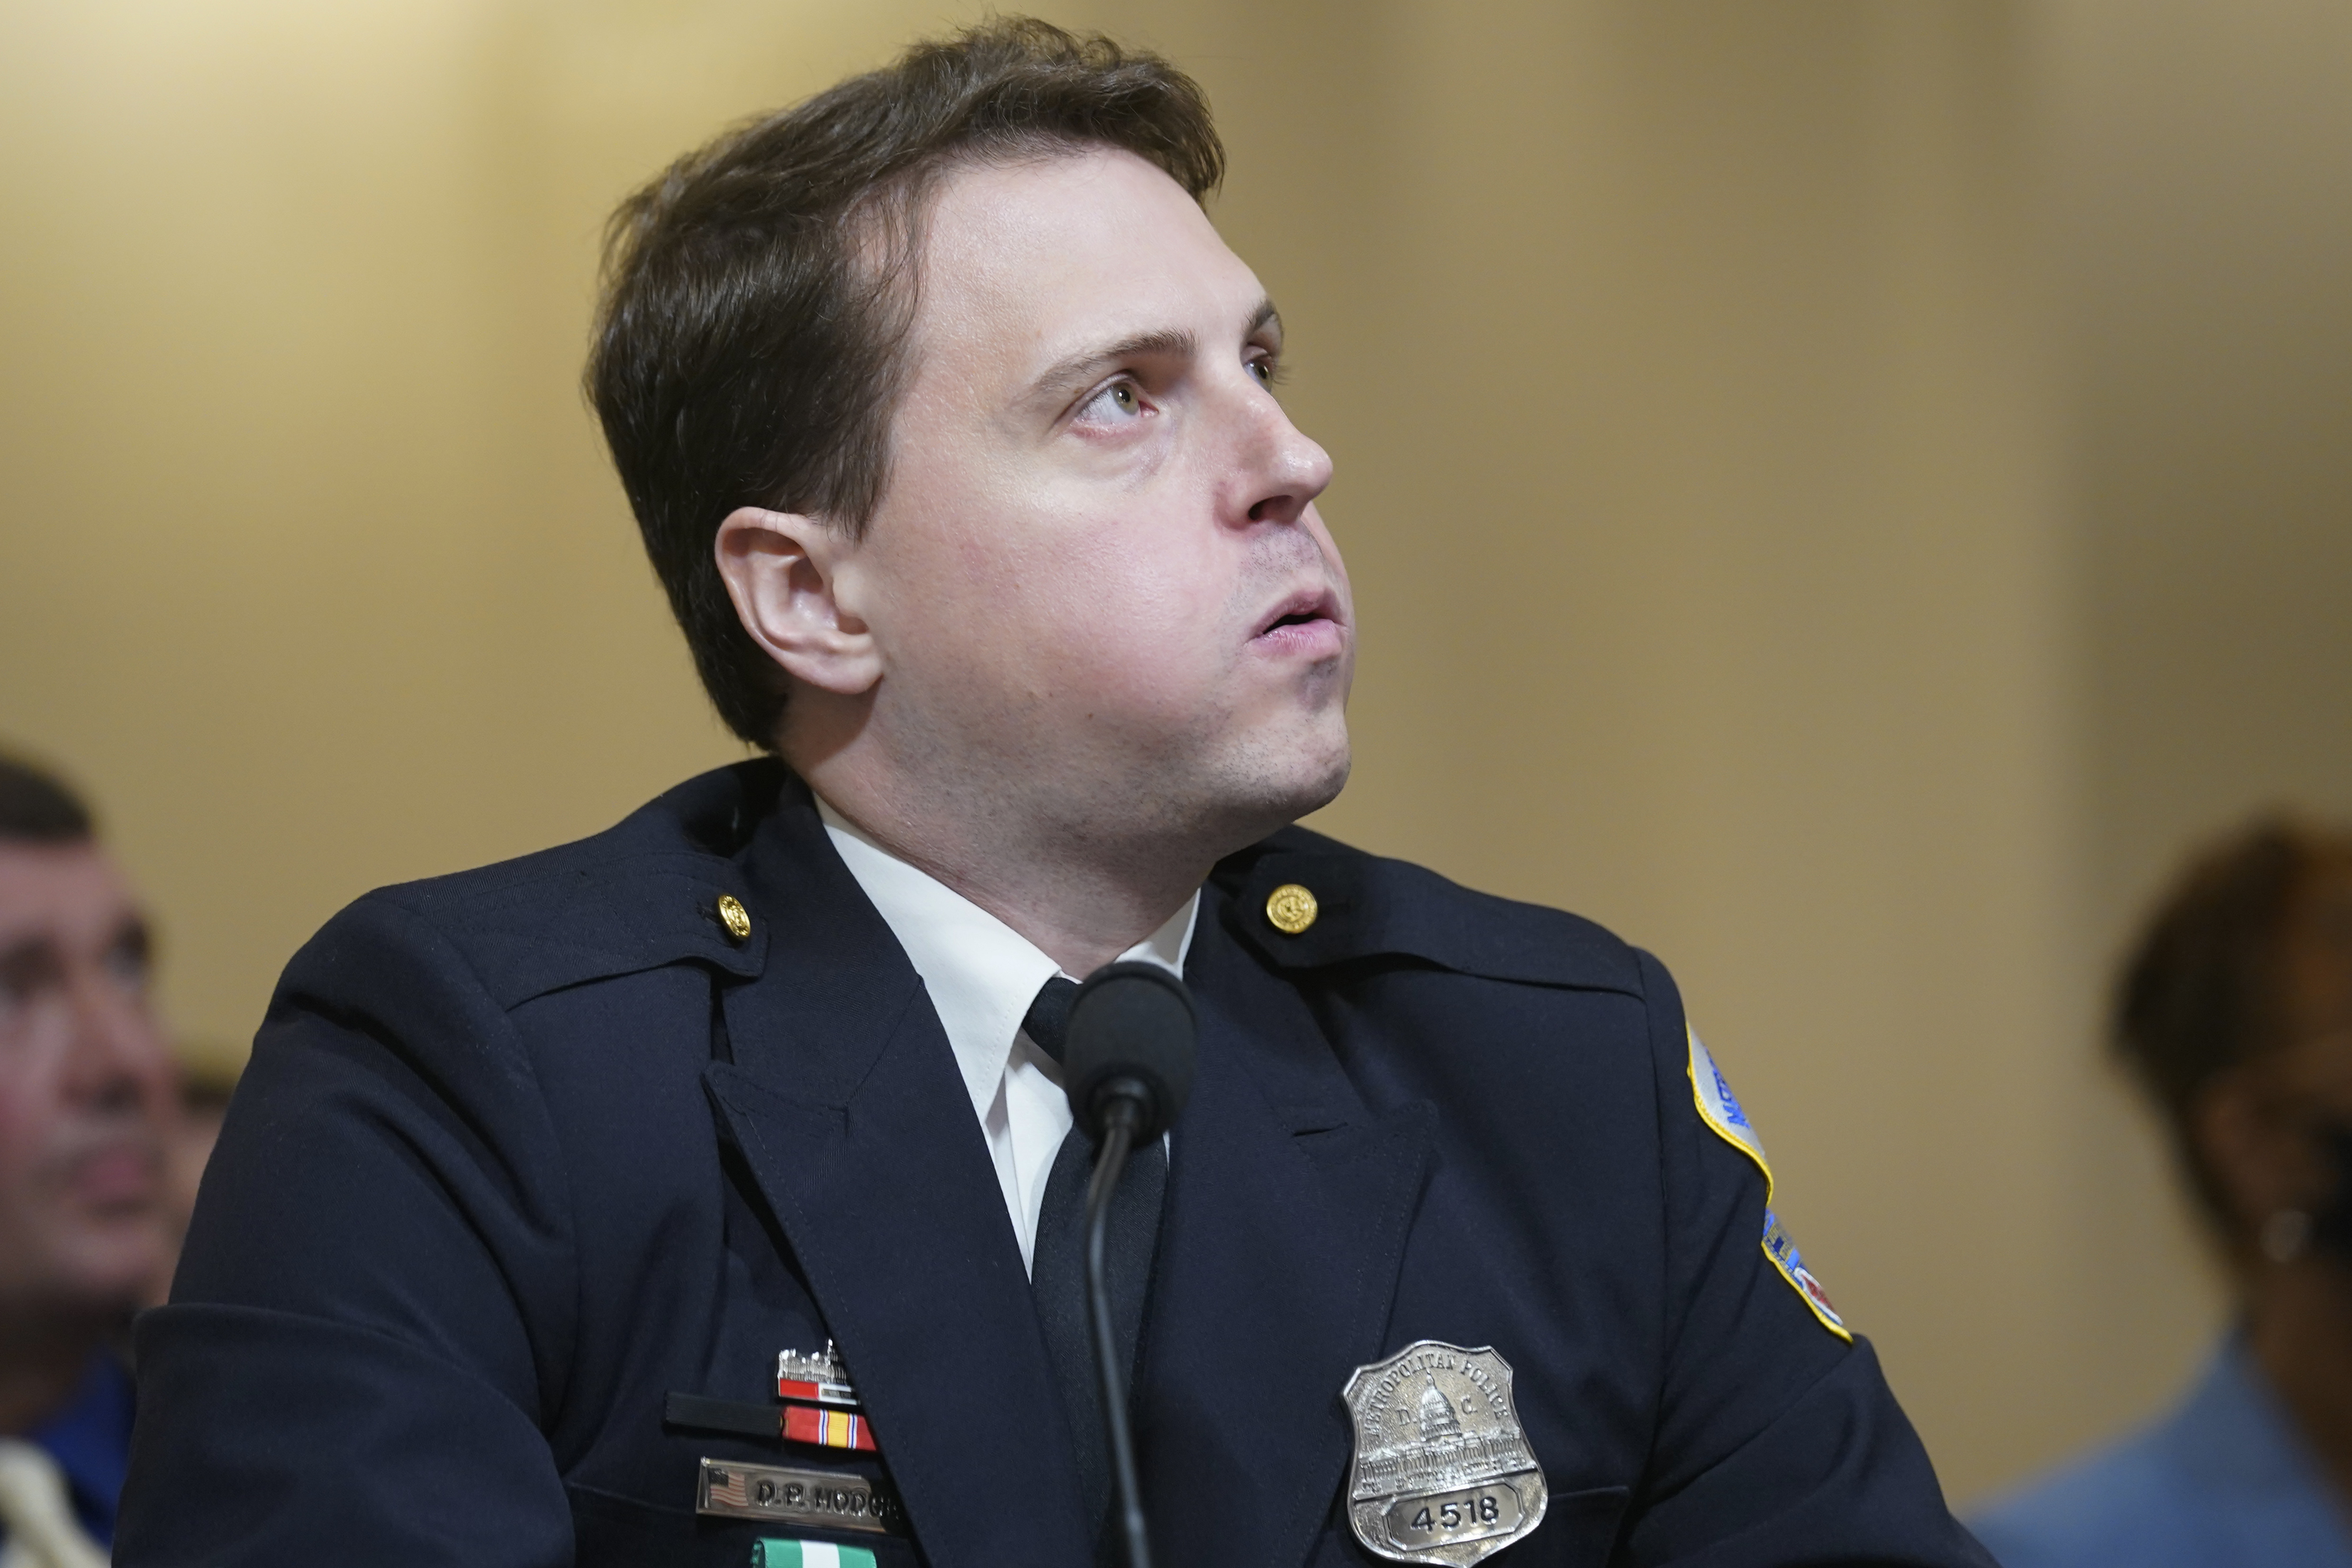 Metropolitan Police Department Officer Daniel Hodges watches video from his body camera during the House select committee hearing on the January 6 attack on Capitol Hill on Tuesday, July 27.